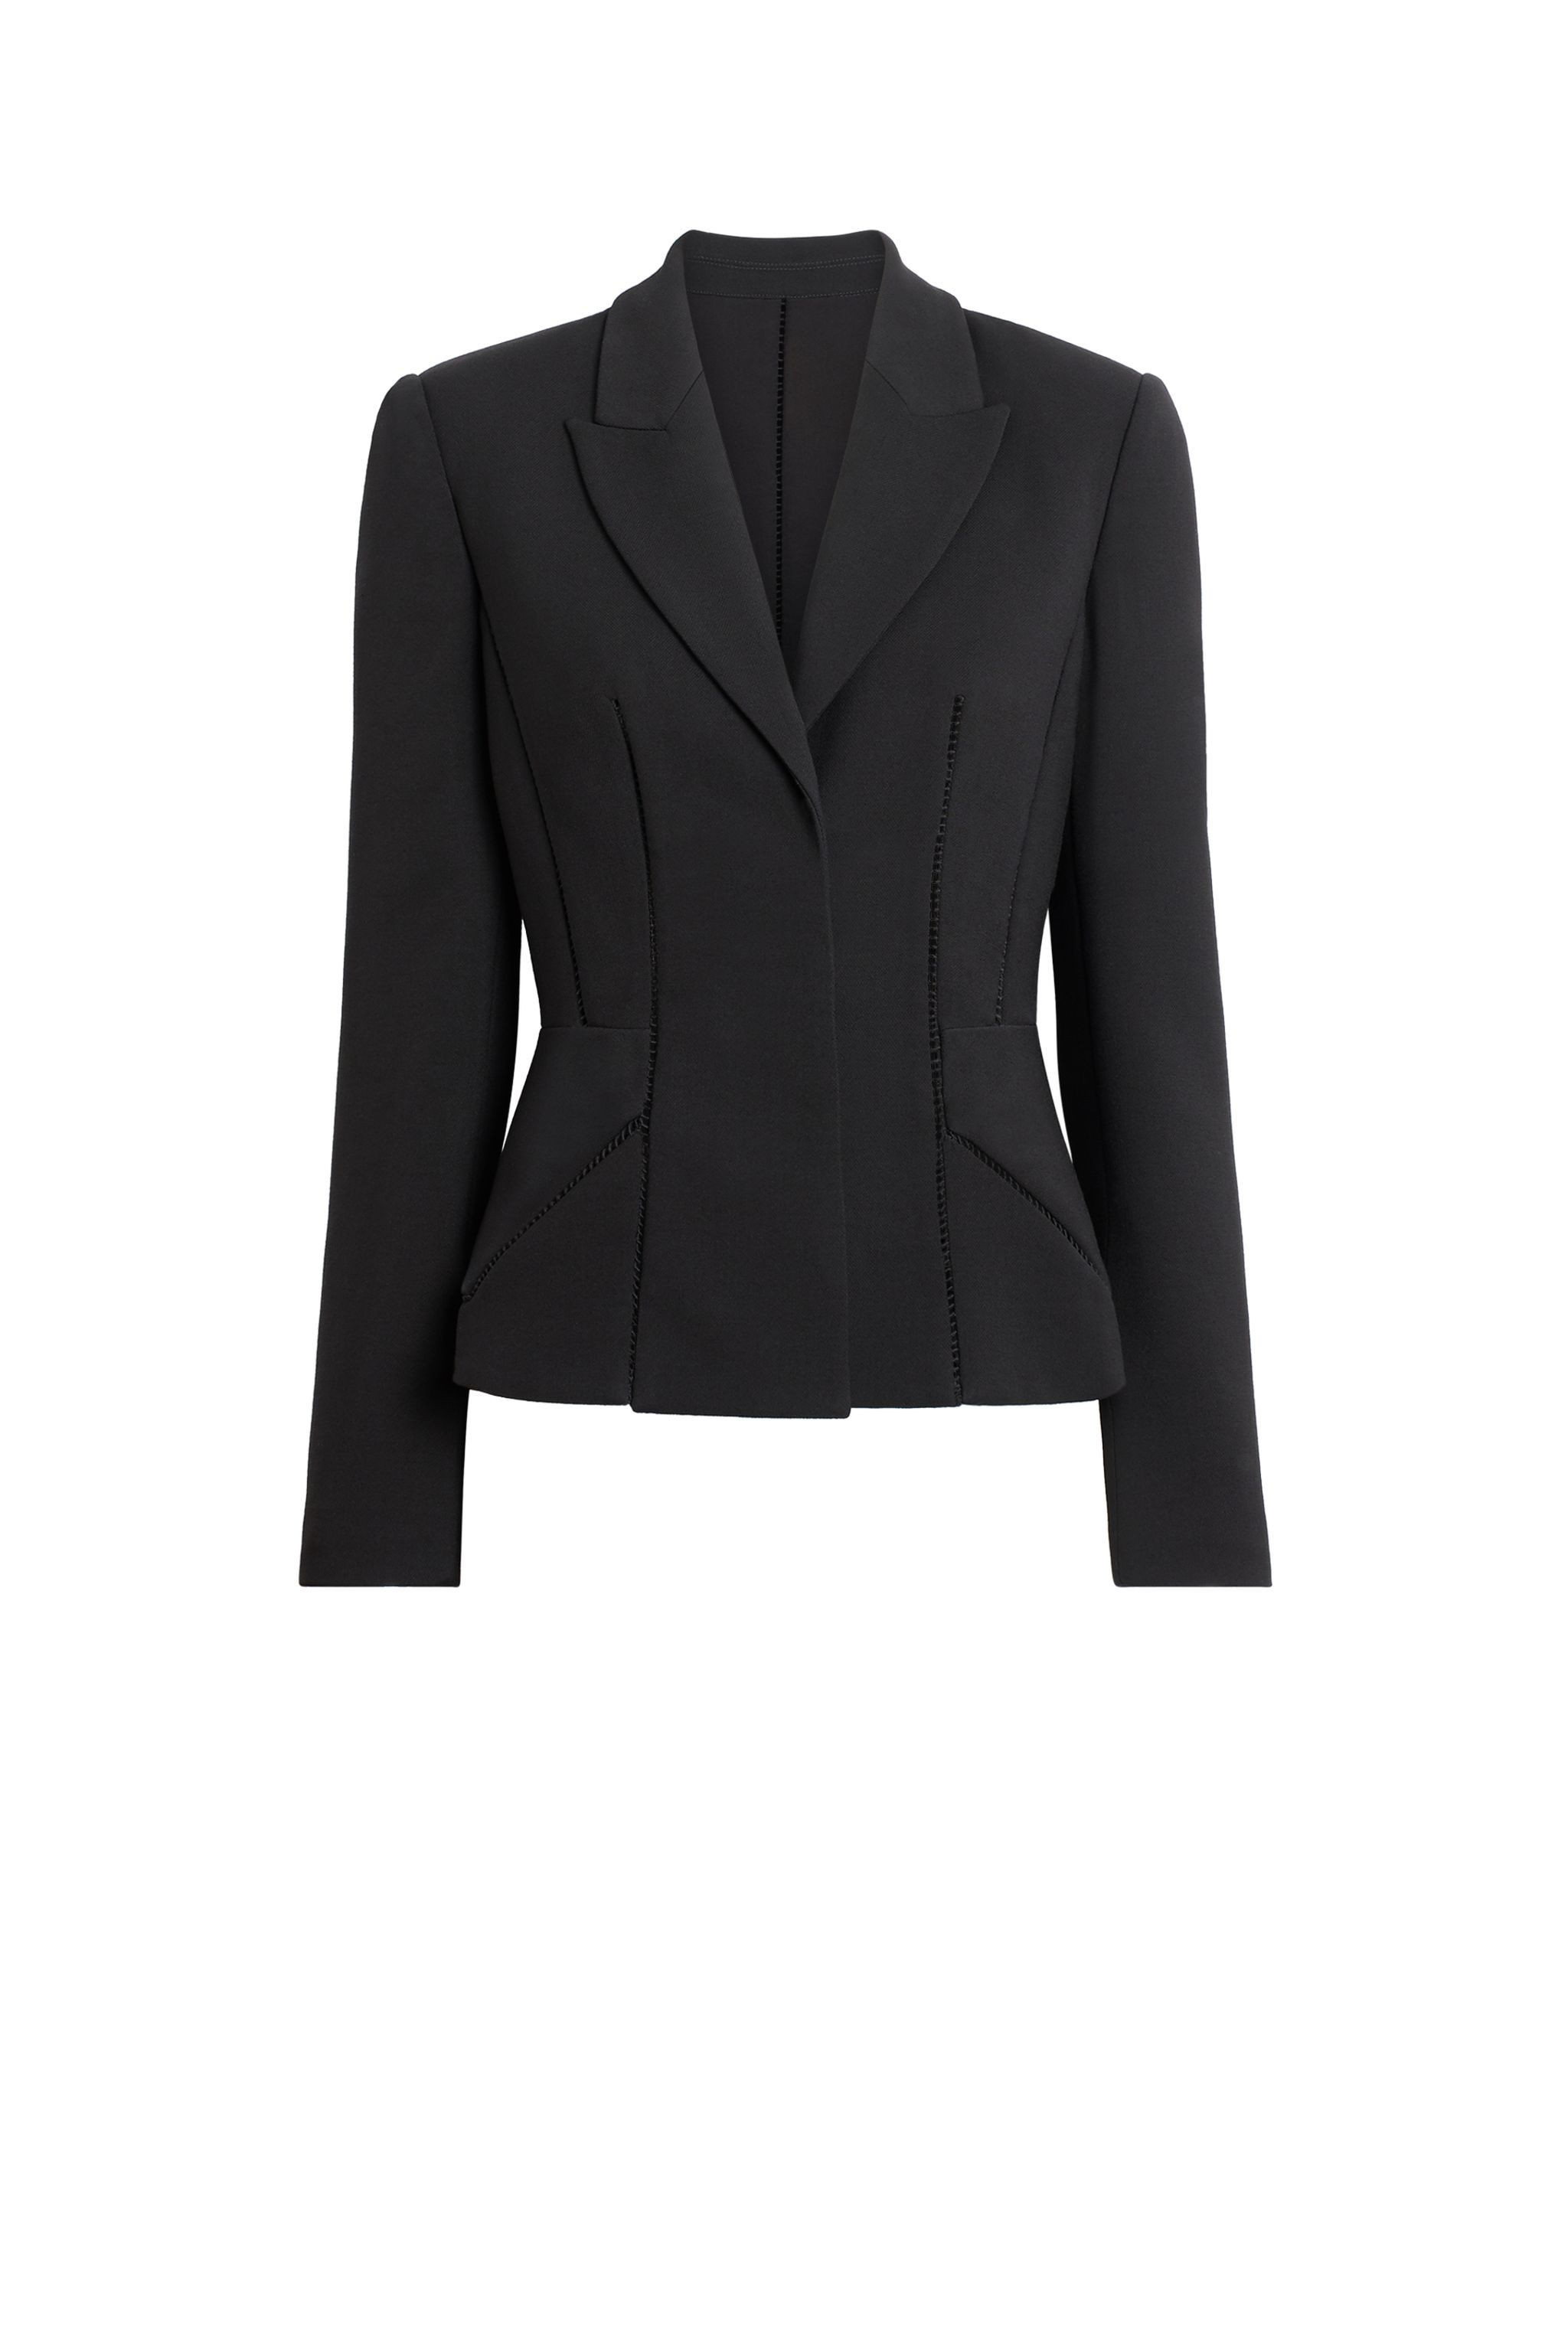 Black stretch wool crepe fitted jacket | Roberto Cavalli ...